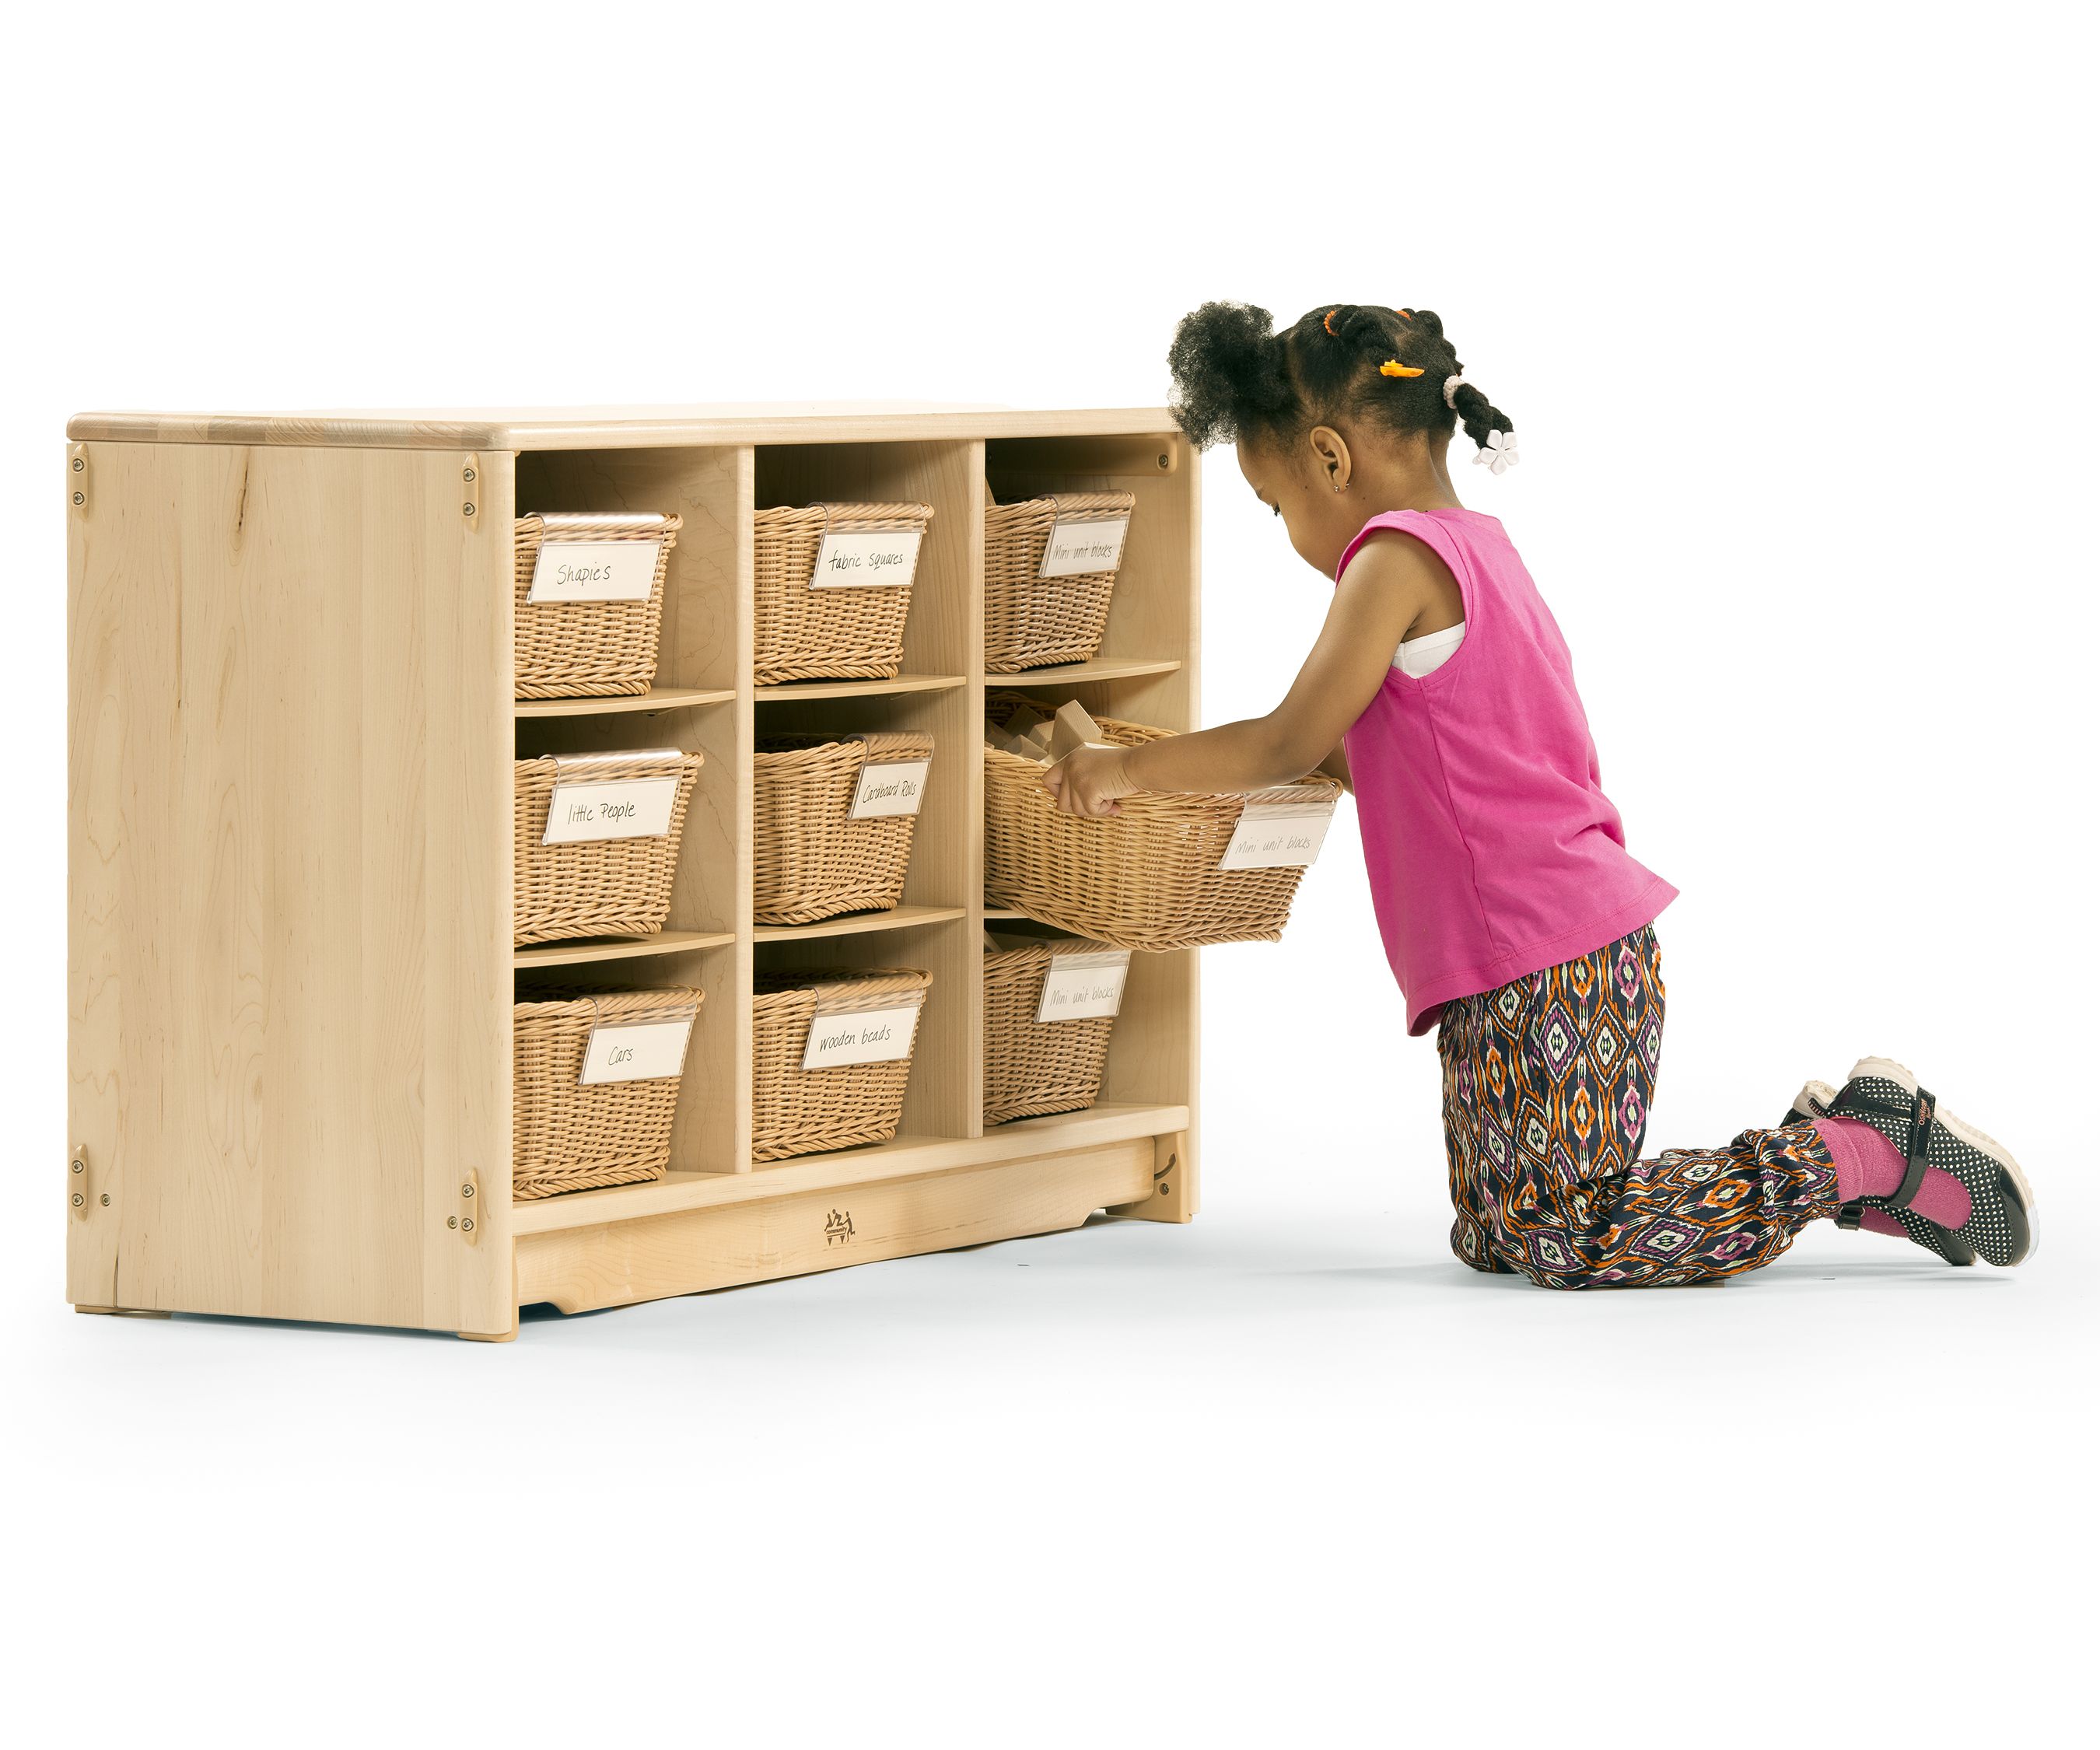 https://www.communityplaythings.com/-/media/images/product-images/classroom/shelving/product-images/g483-deep-basket/g483-primary_in-use.ashx?rev=54104ab2edeb4c3aa44de9deed9ddd44&hash=F39EB60ABB89A3DA6061B925F1E88B7A